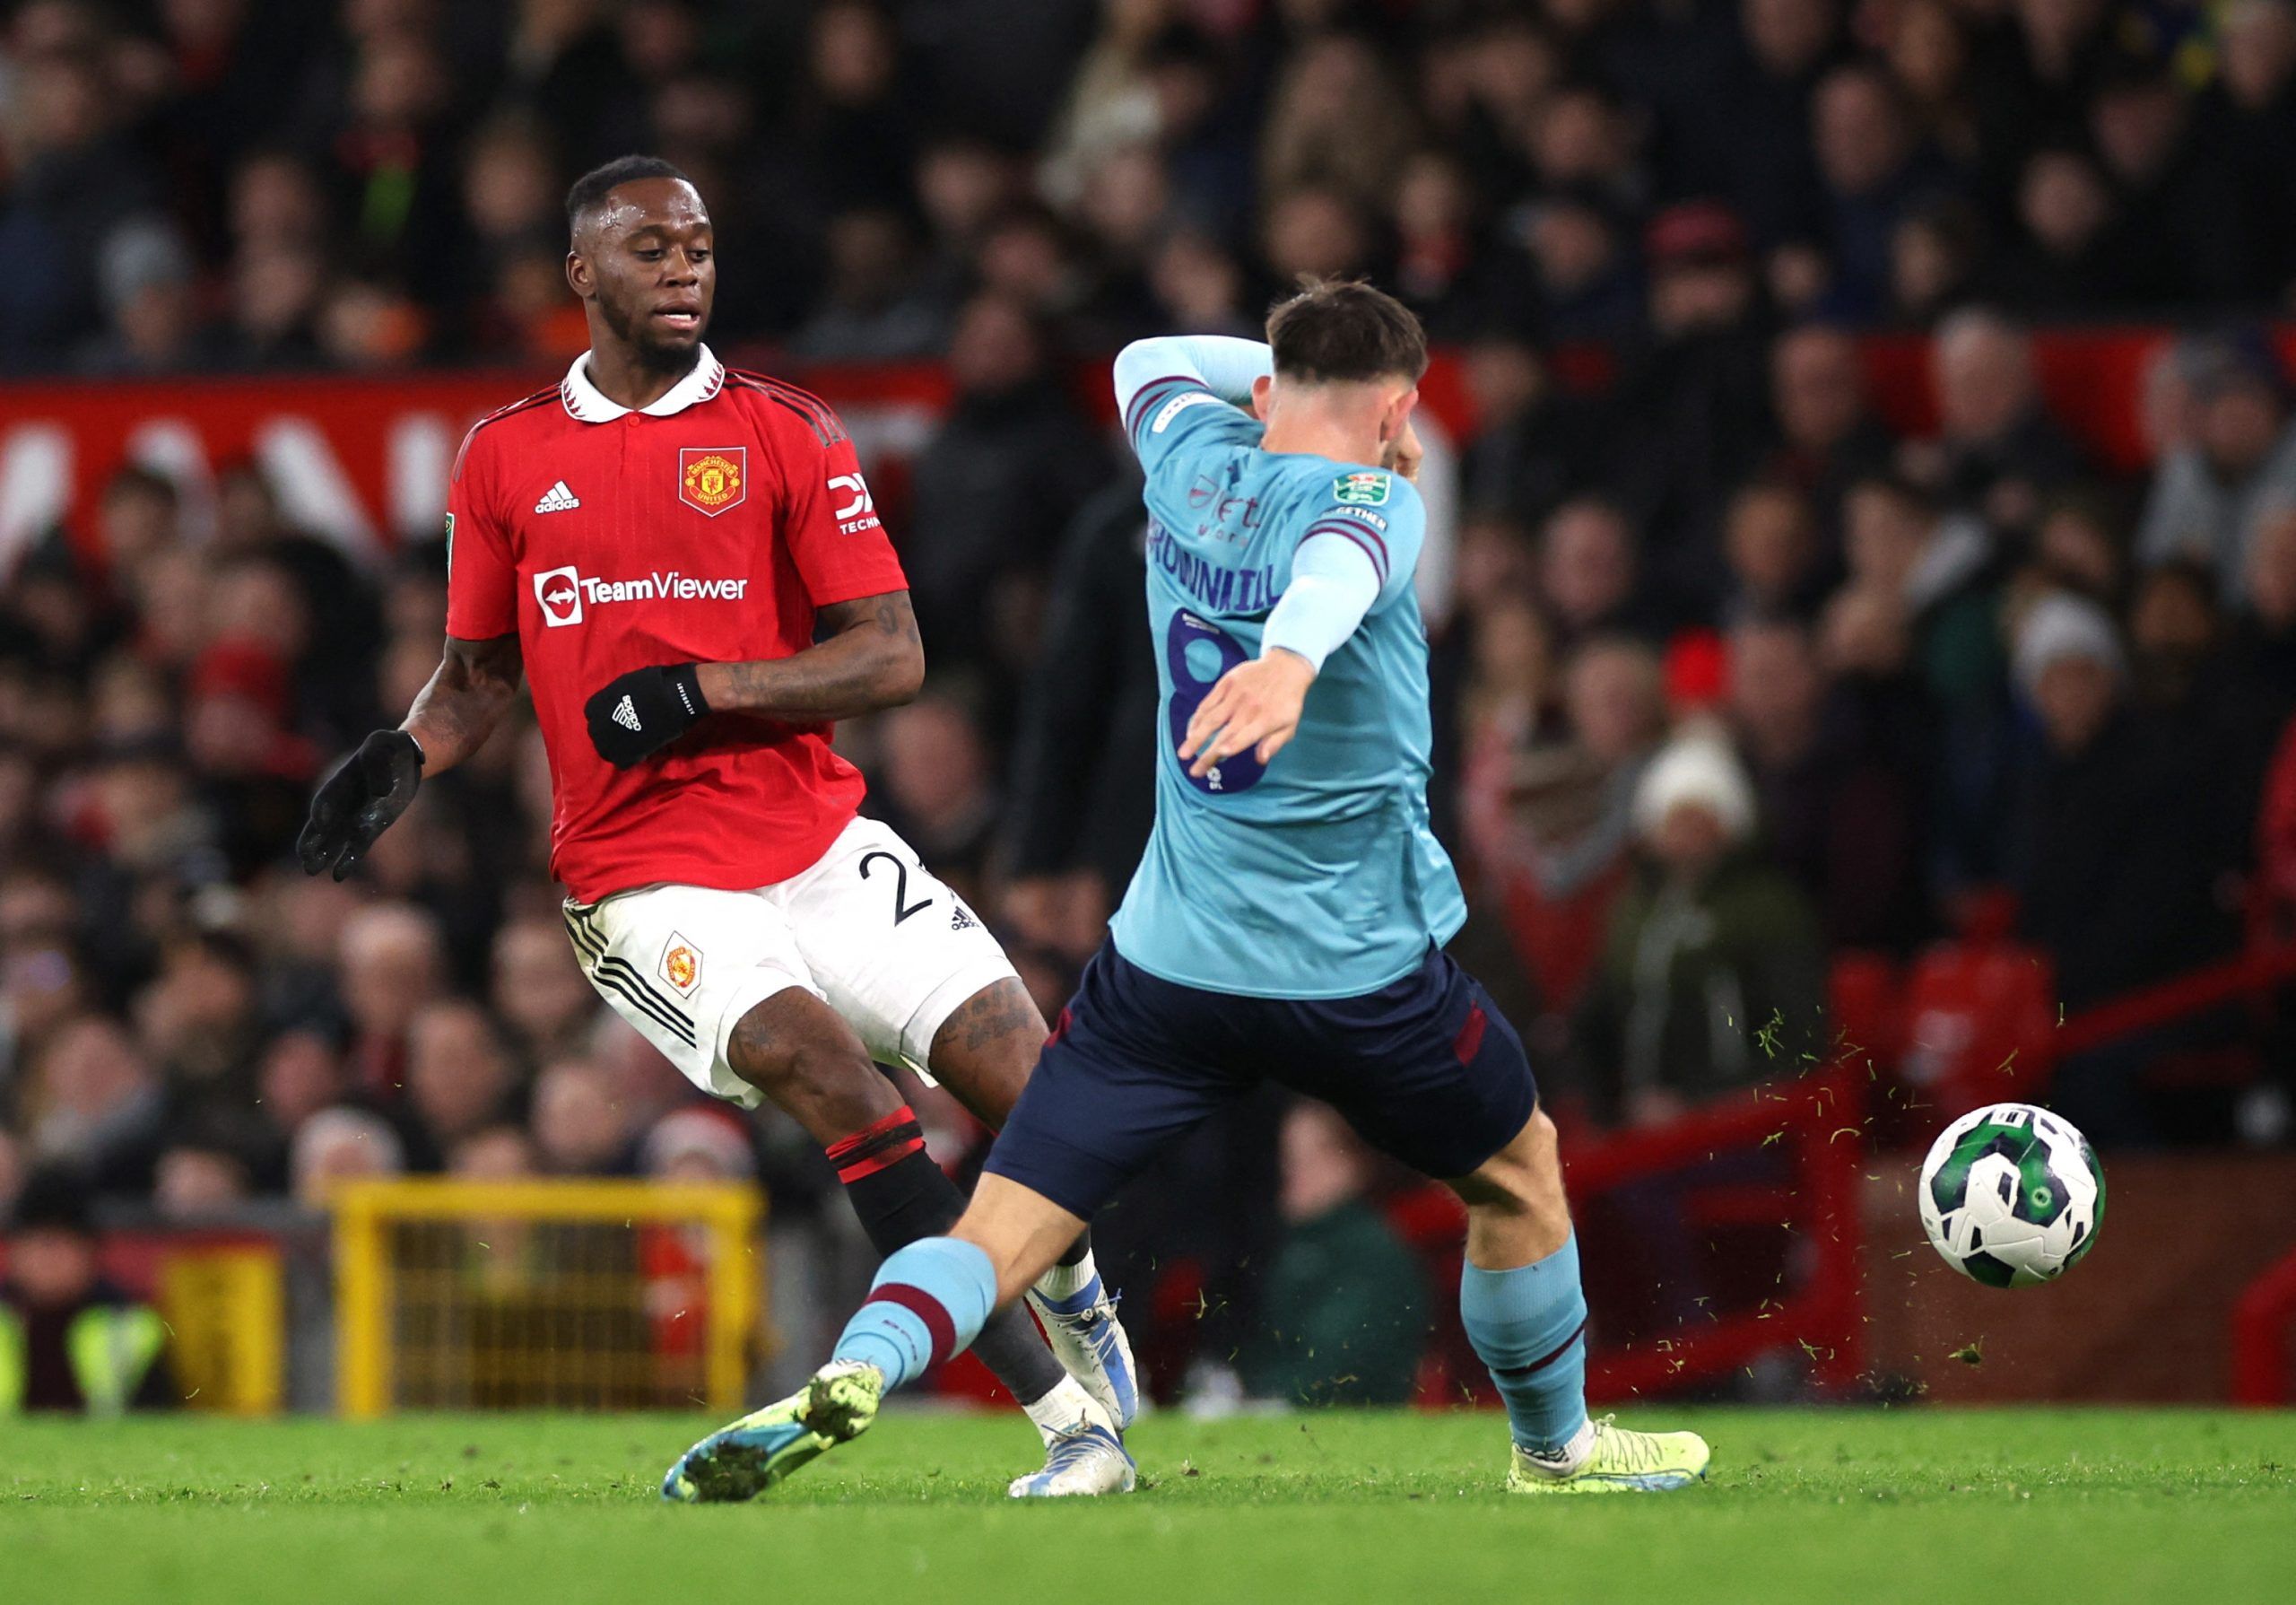 Soccer Football - Carabao Cup - Round of 16 - Manchester United v Burnley - Old Trafford, Manchester, Britain - December 21, 2022 Manchester United's Aaron Wan-Bissaka in action with Burnley's Josh Brownhill Action Images via Reuters/Phil Noble EDITORIAL USE ONLY. No use with unauthorized audio, video, data, fixture lists, club/league logos or 'live' services. Online in-match use limited to 75 images, no video emulation. No use in betting, games or single club /league/player publications.  Pleas